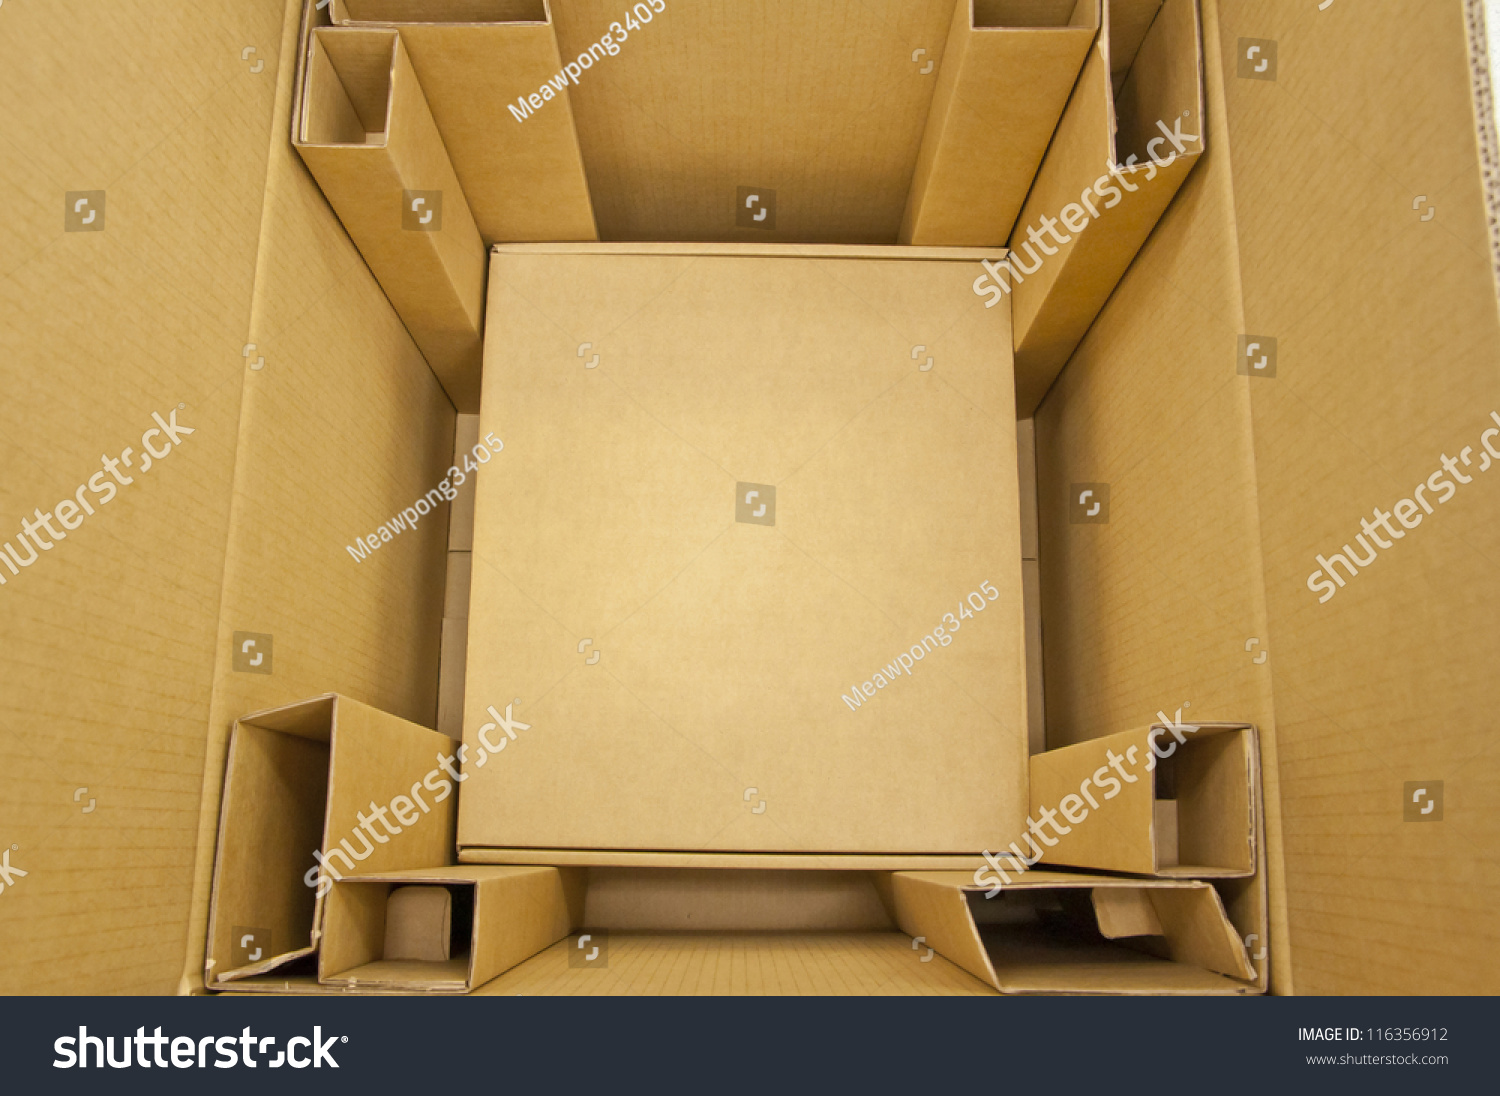 Inside brown color boxes #116356912